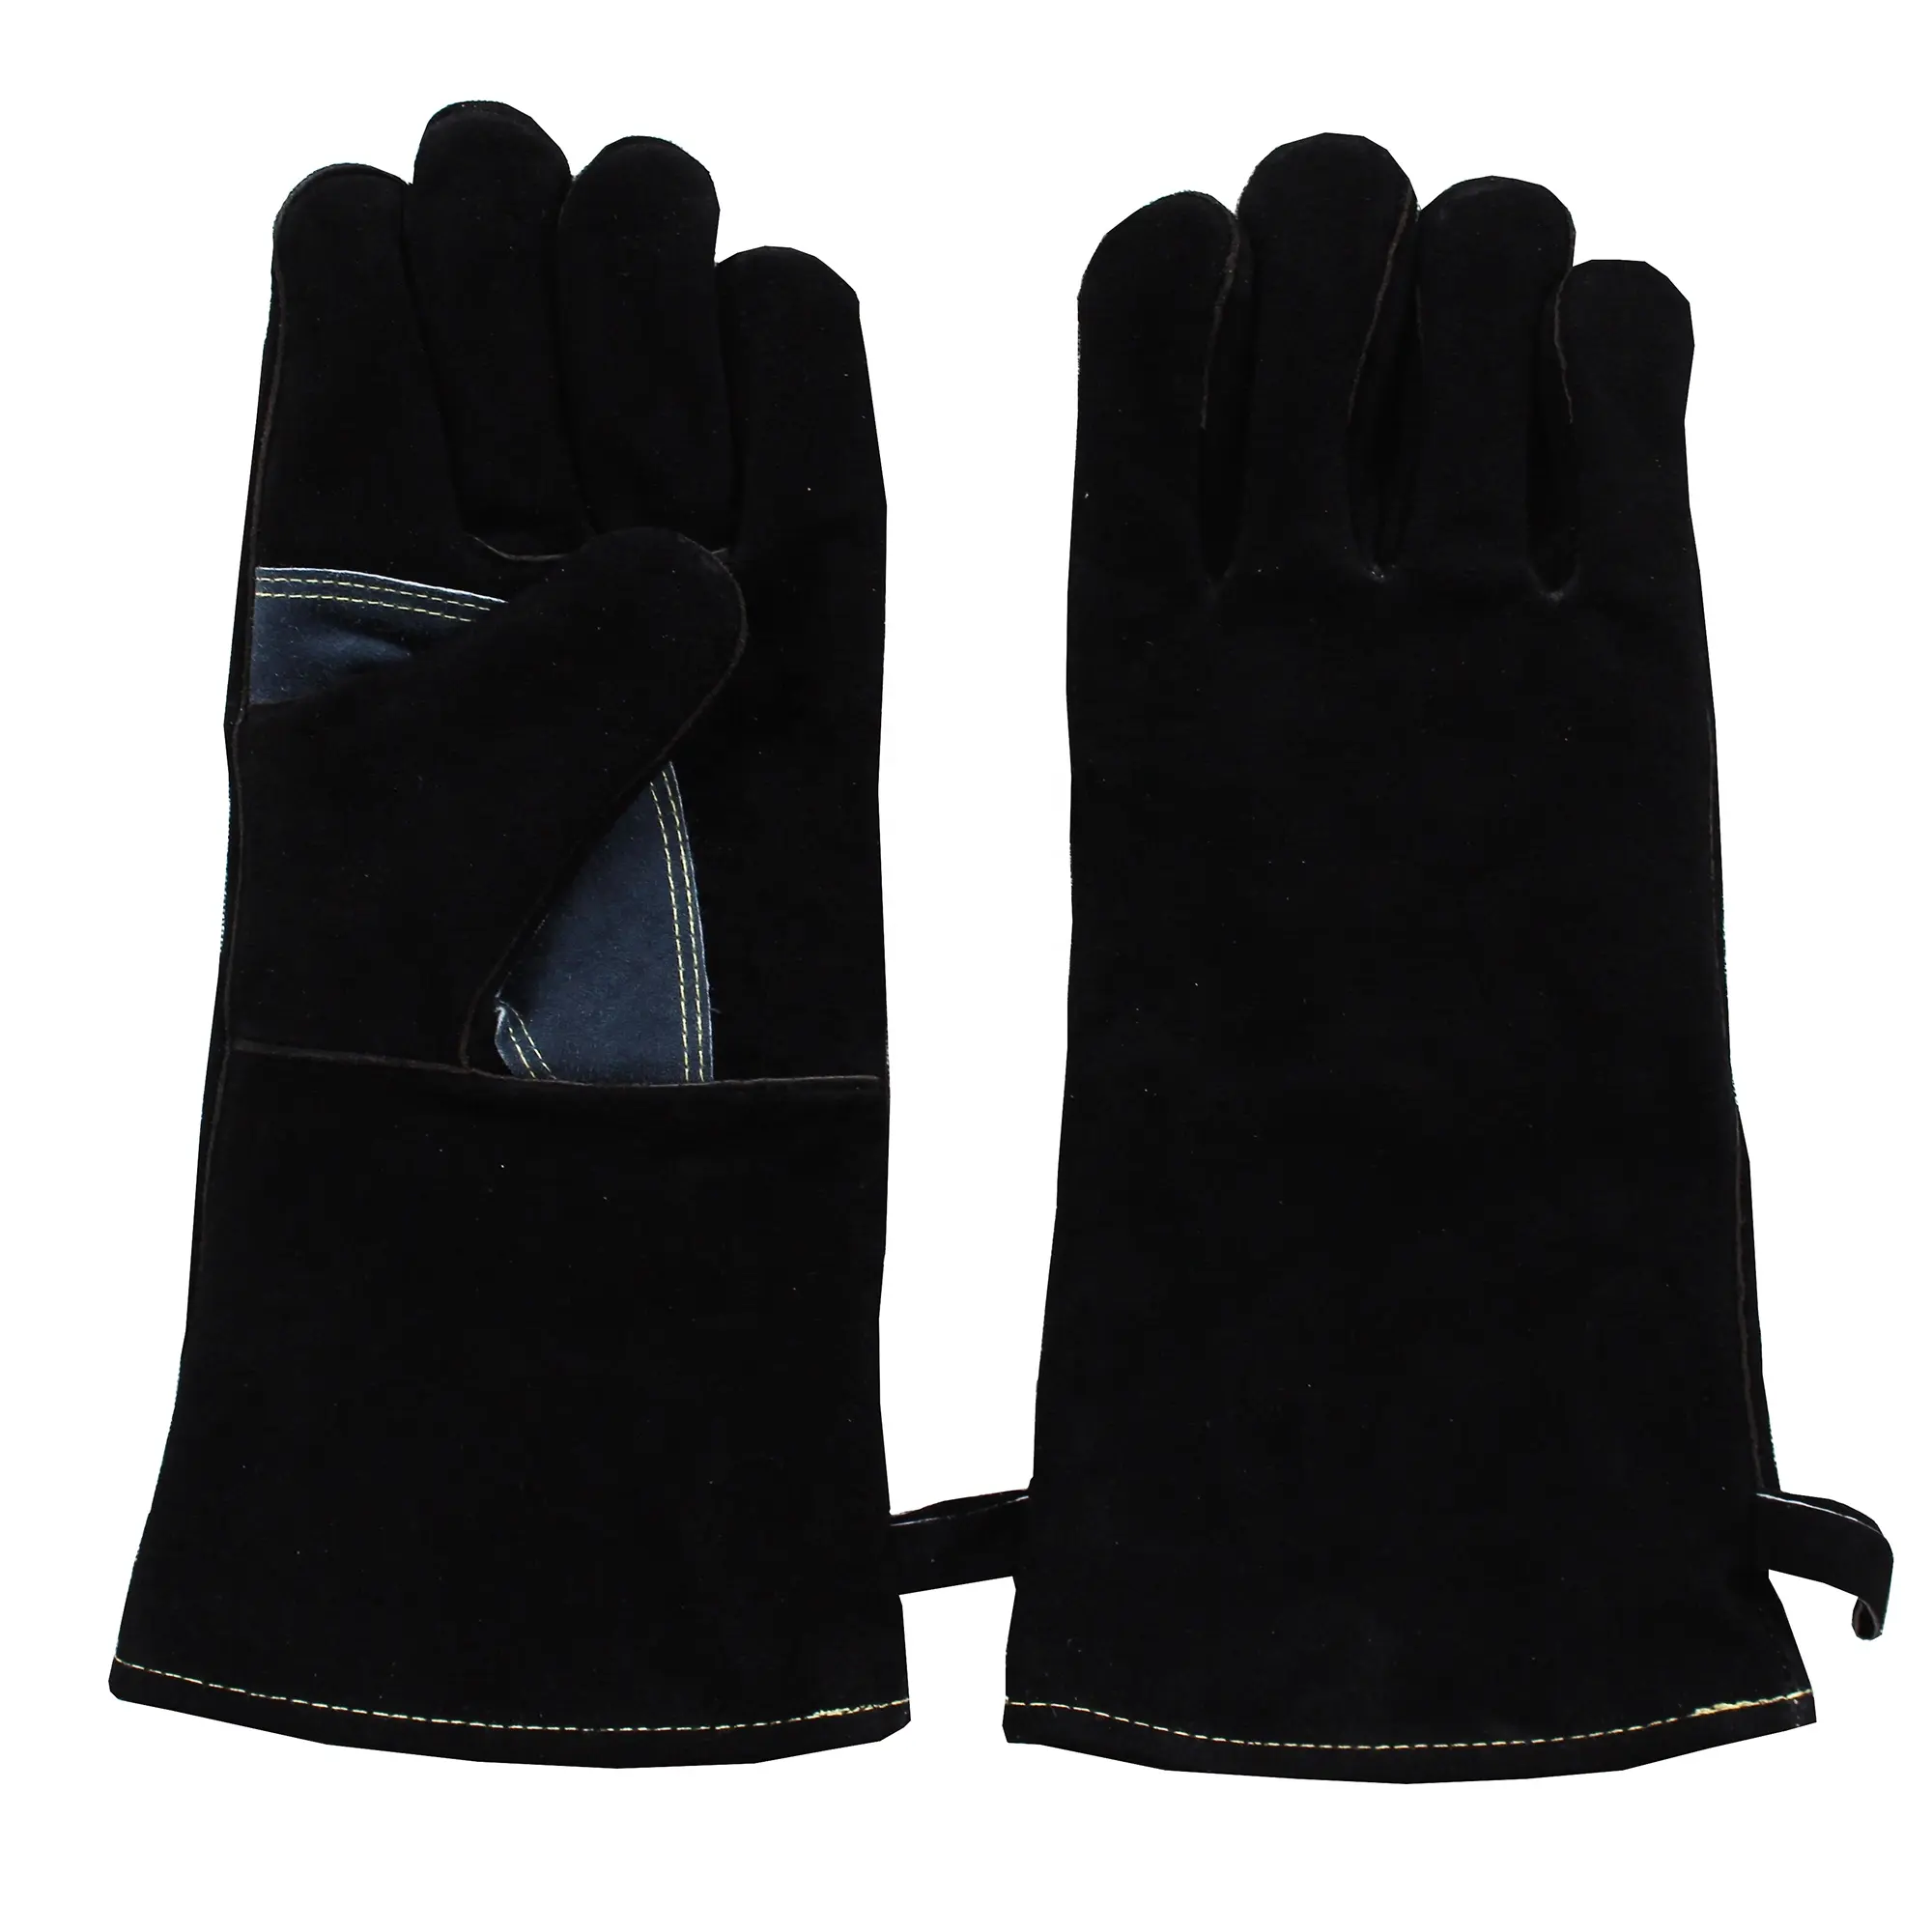 Black Welding Gloves Heat/Fire Resistant Leather For Stick,Mig,Forge,BBQ,Grill,Fireplace,Wood Stove Heavy Duty Work Gloves